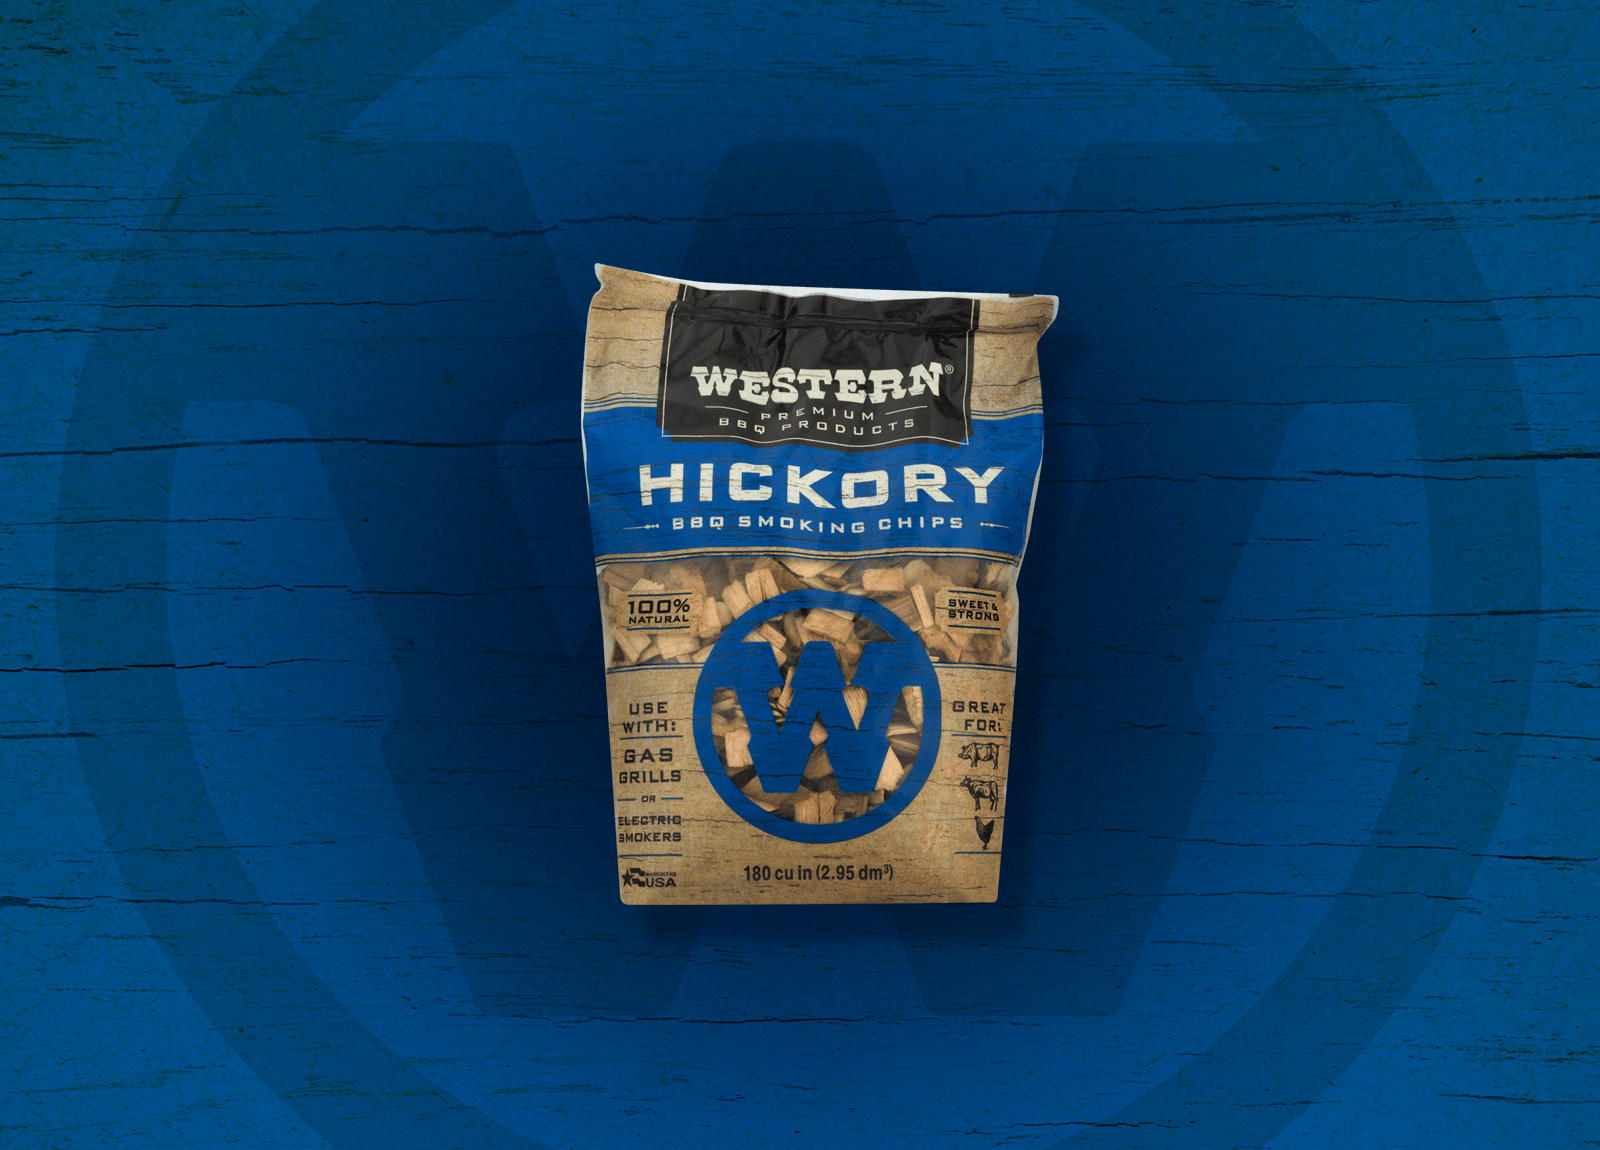 Western Hickory Smoking Chips